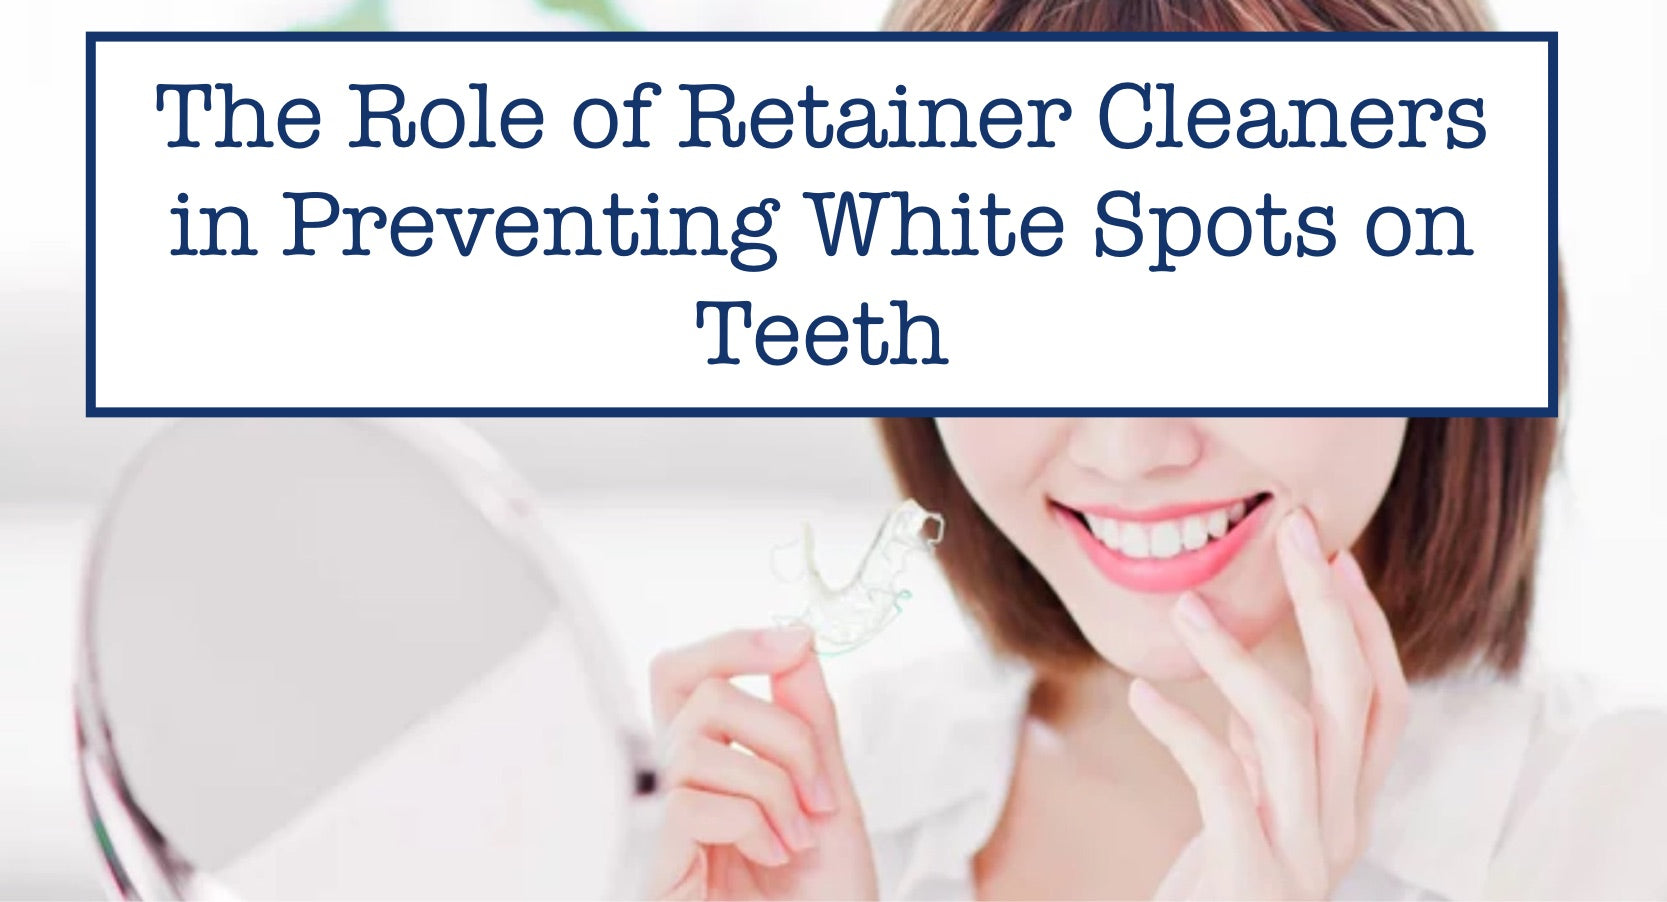 The Role of Retainer Cleaners in Preventing White Spots on Teeth